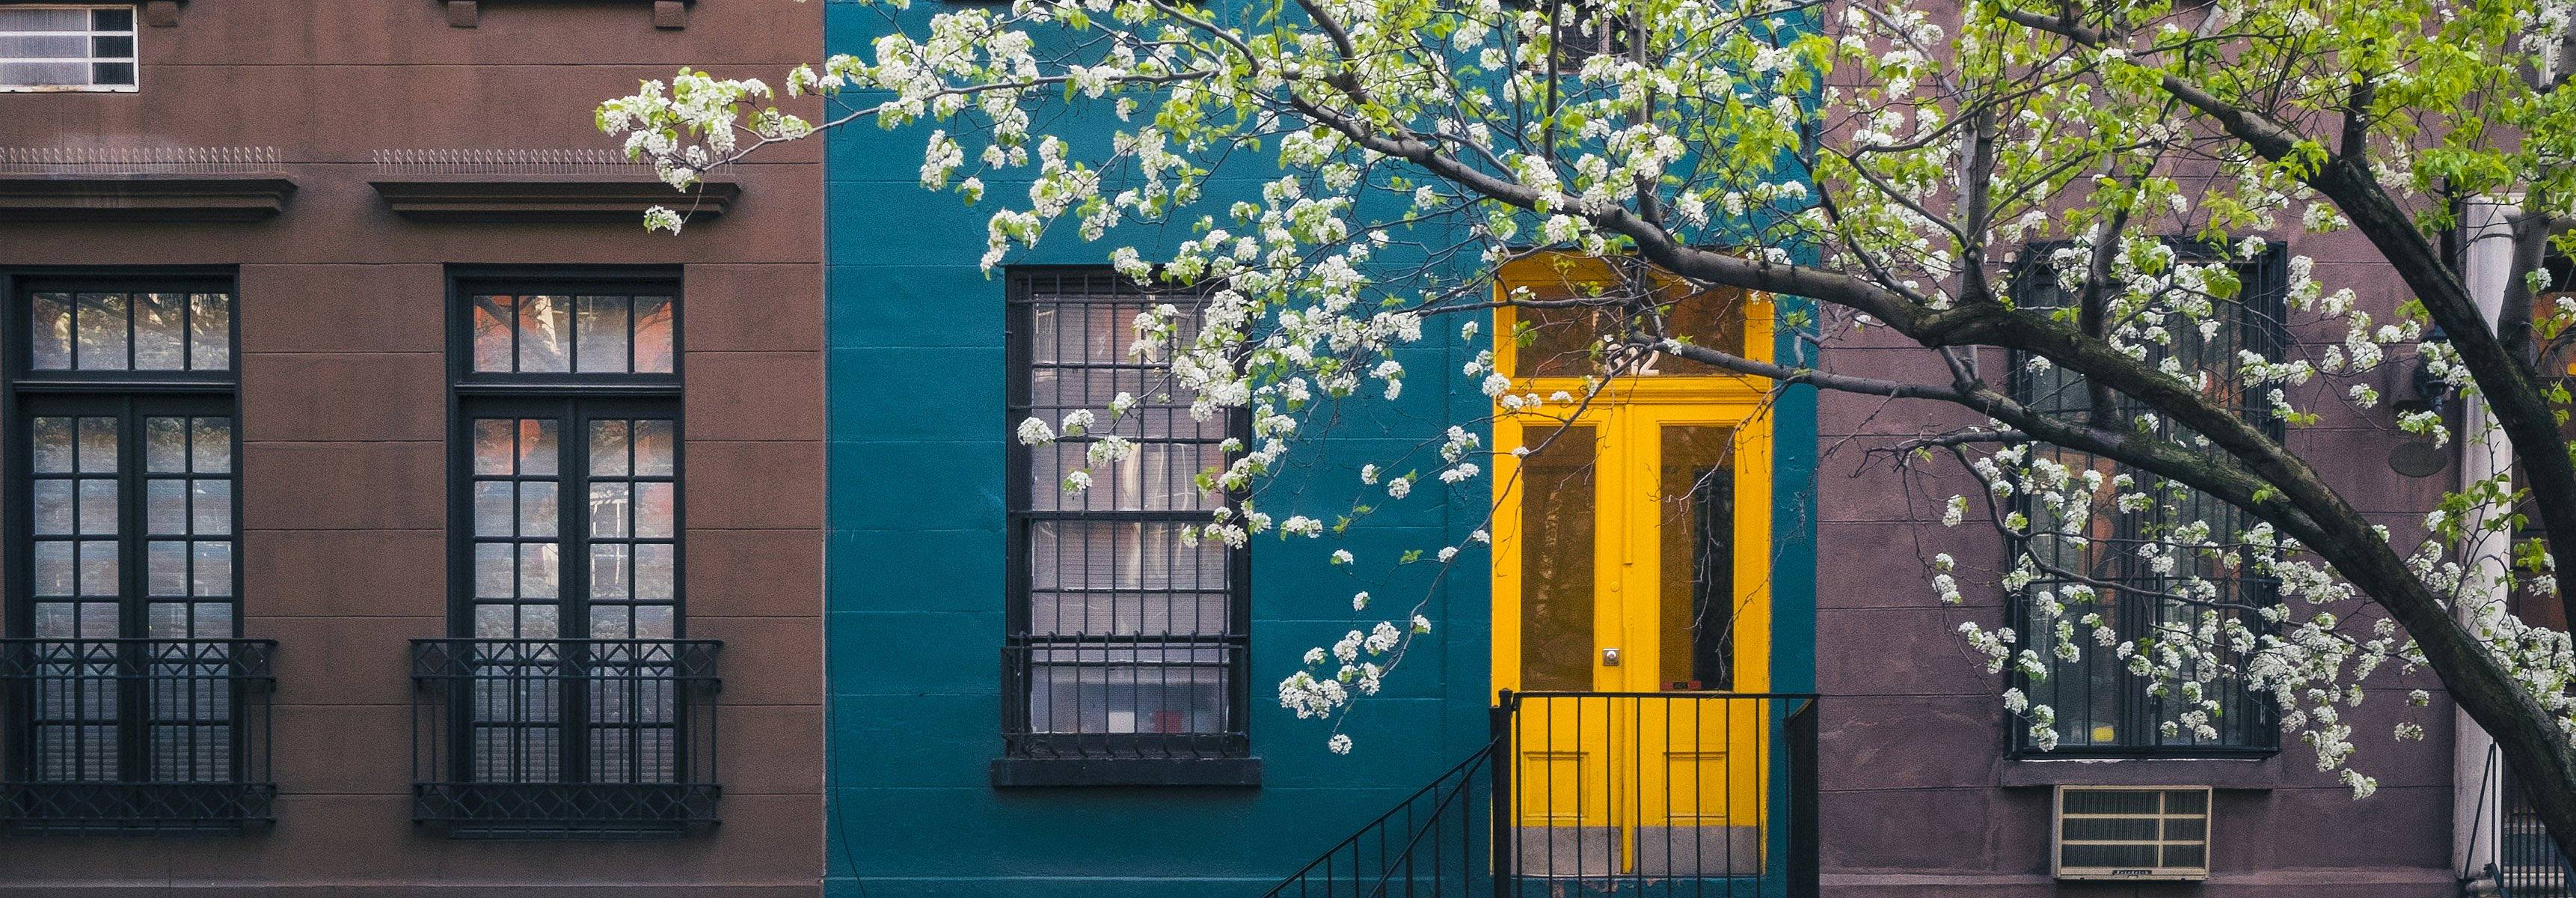 Blossoming tree near an old apartment building, Manhattan, N